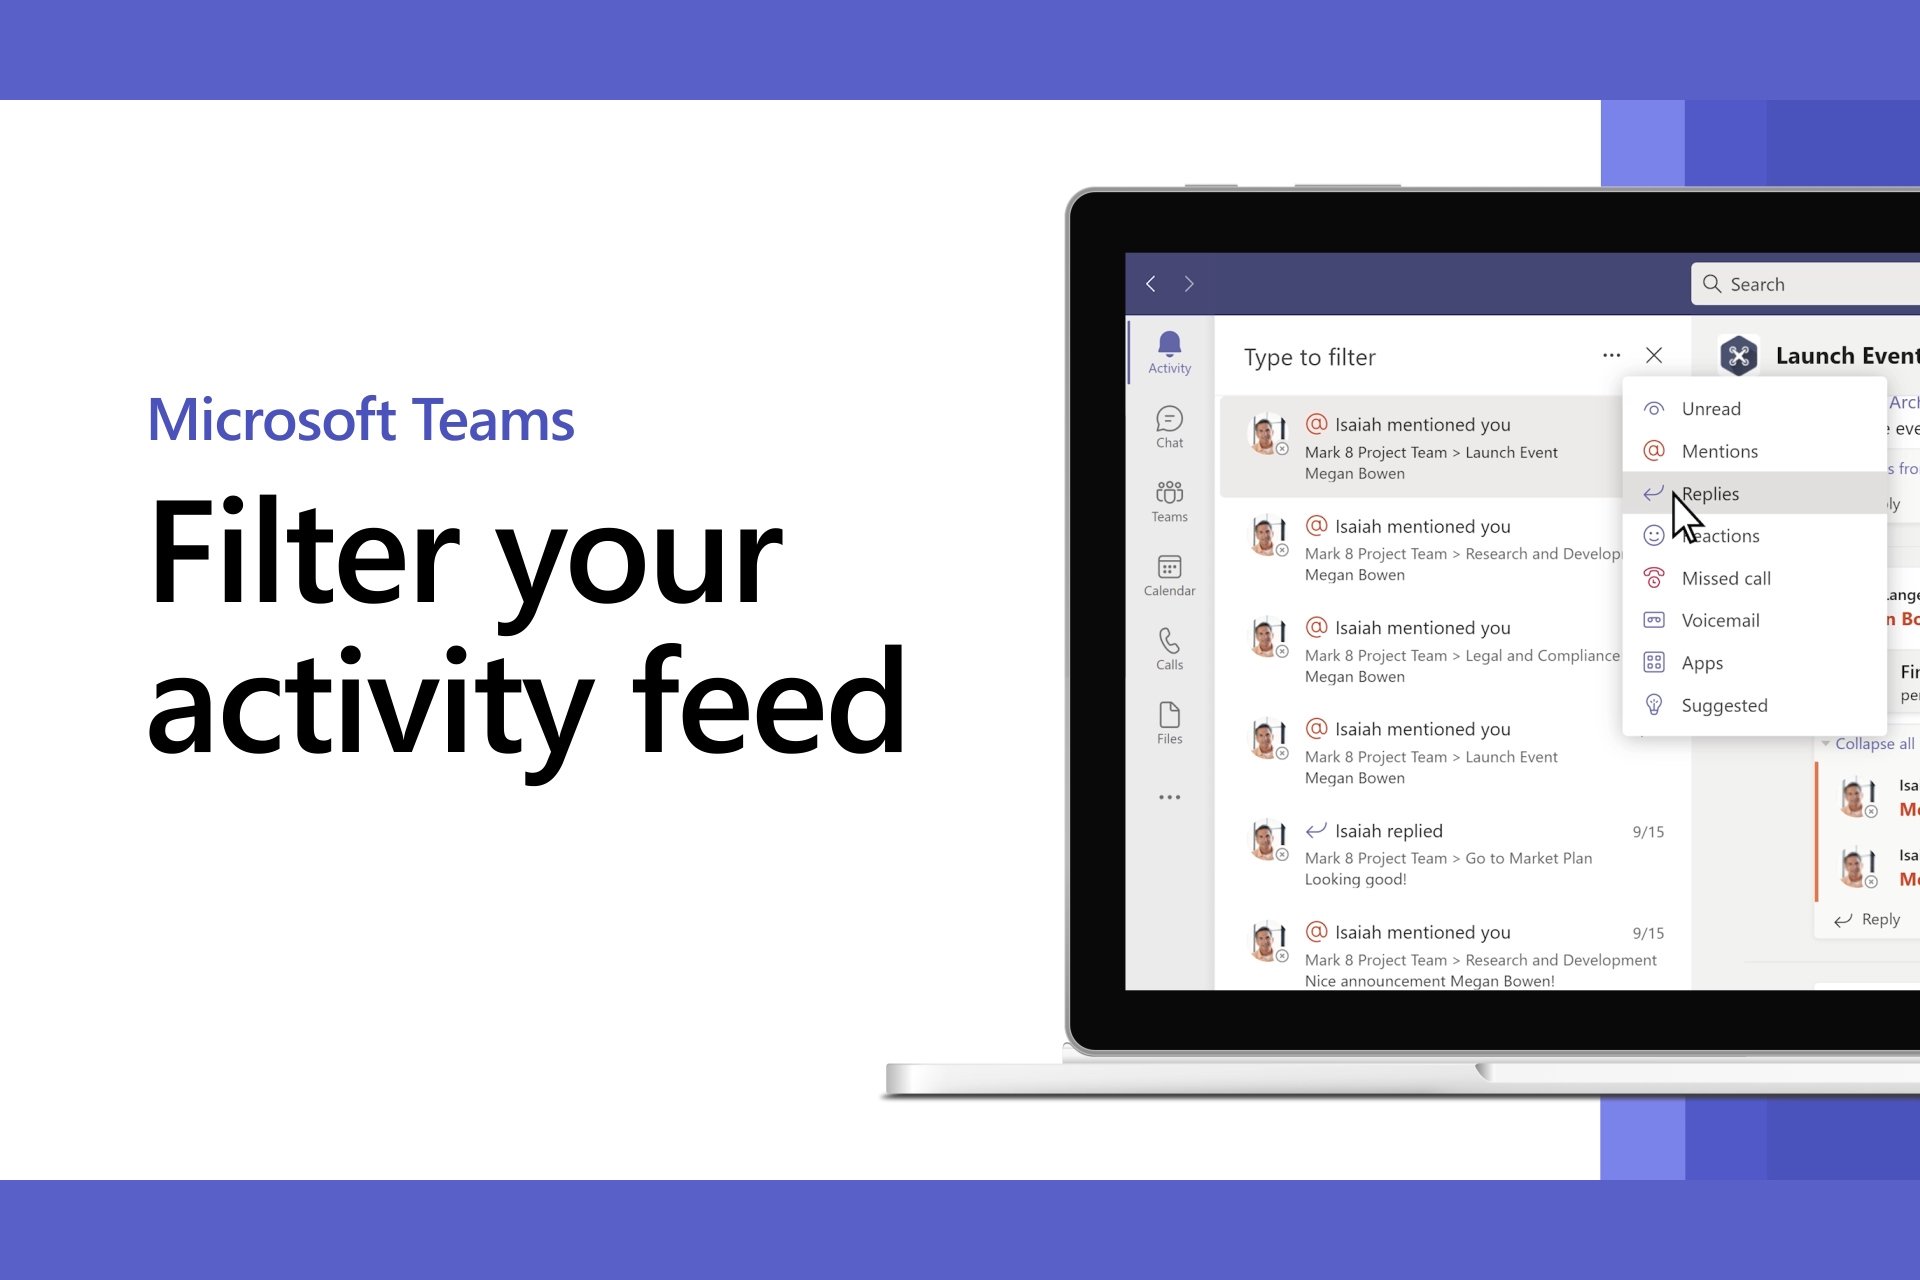 You can turn off the discover feed for a channel in Microsoft Teams